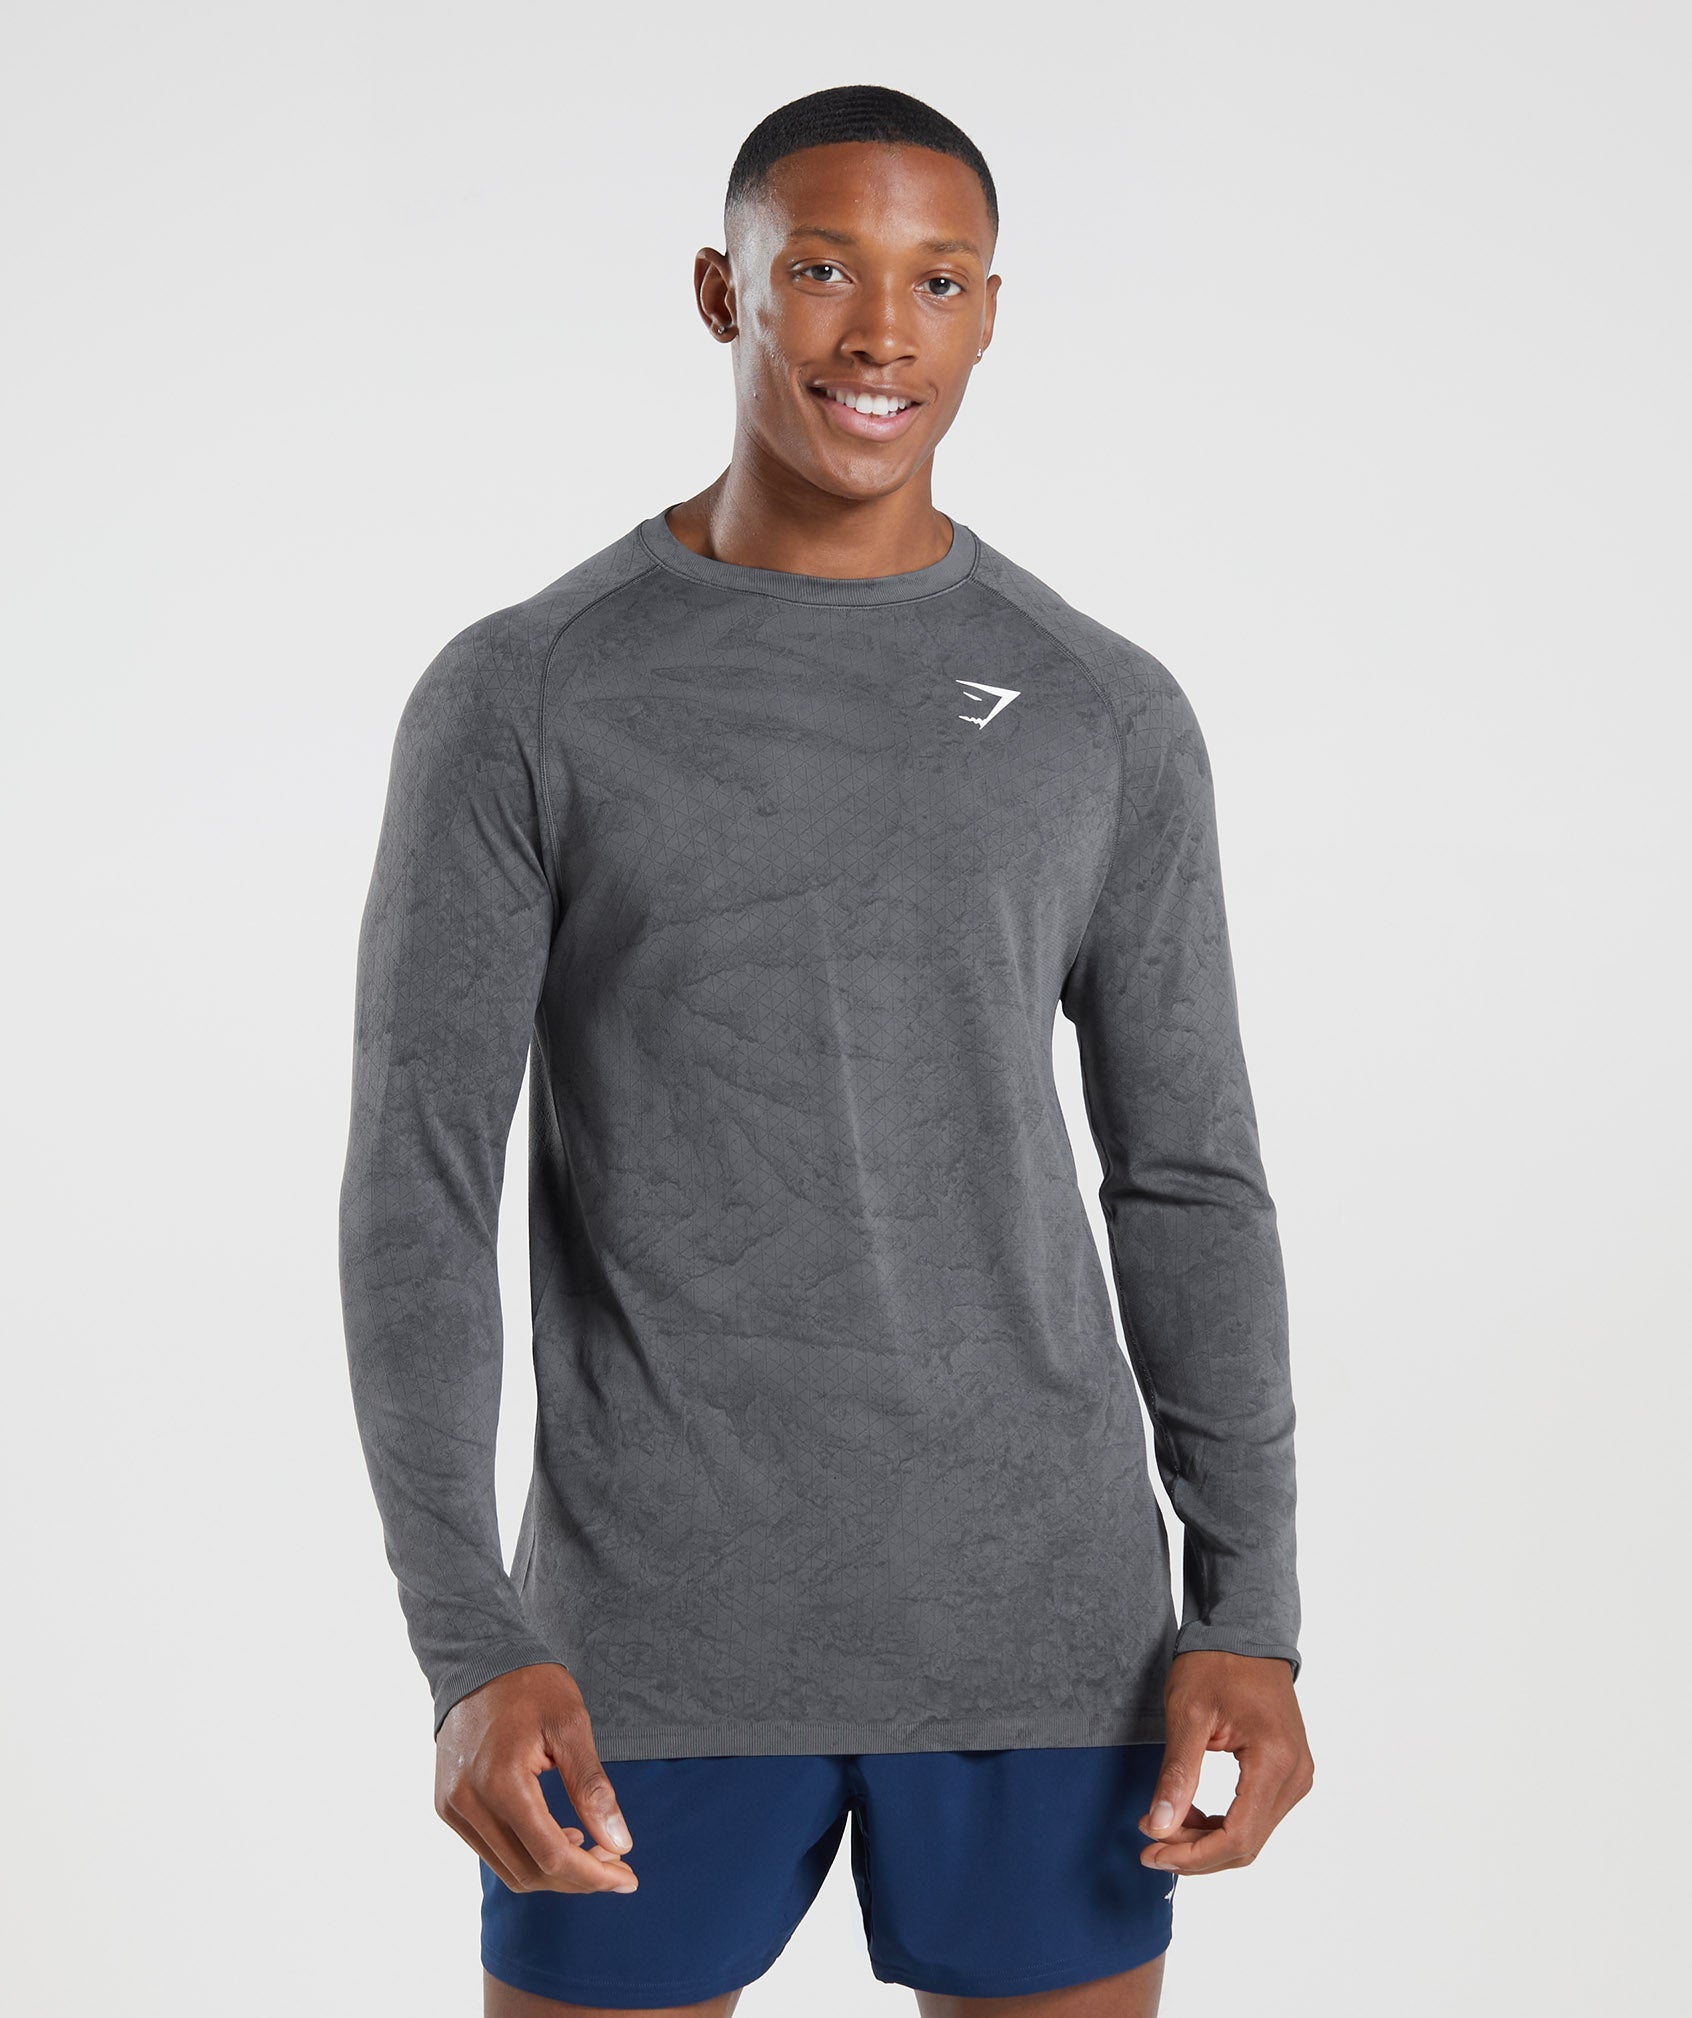 Gymshark Cotton Athletic Long Sleeve Shirts for Men